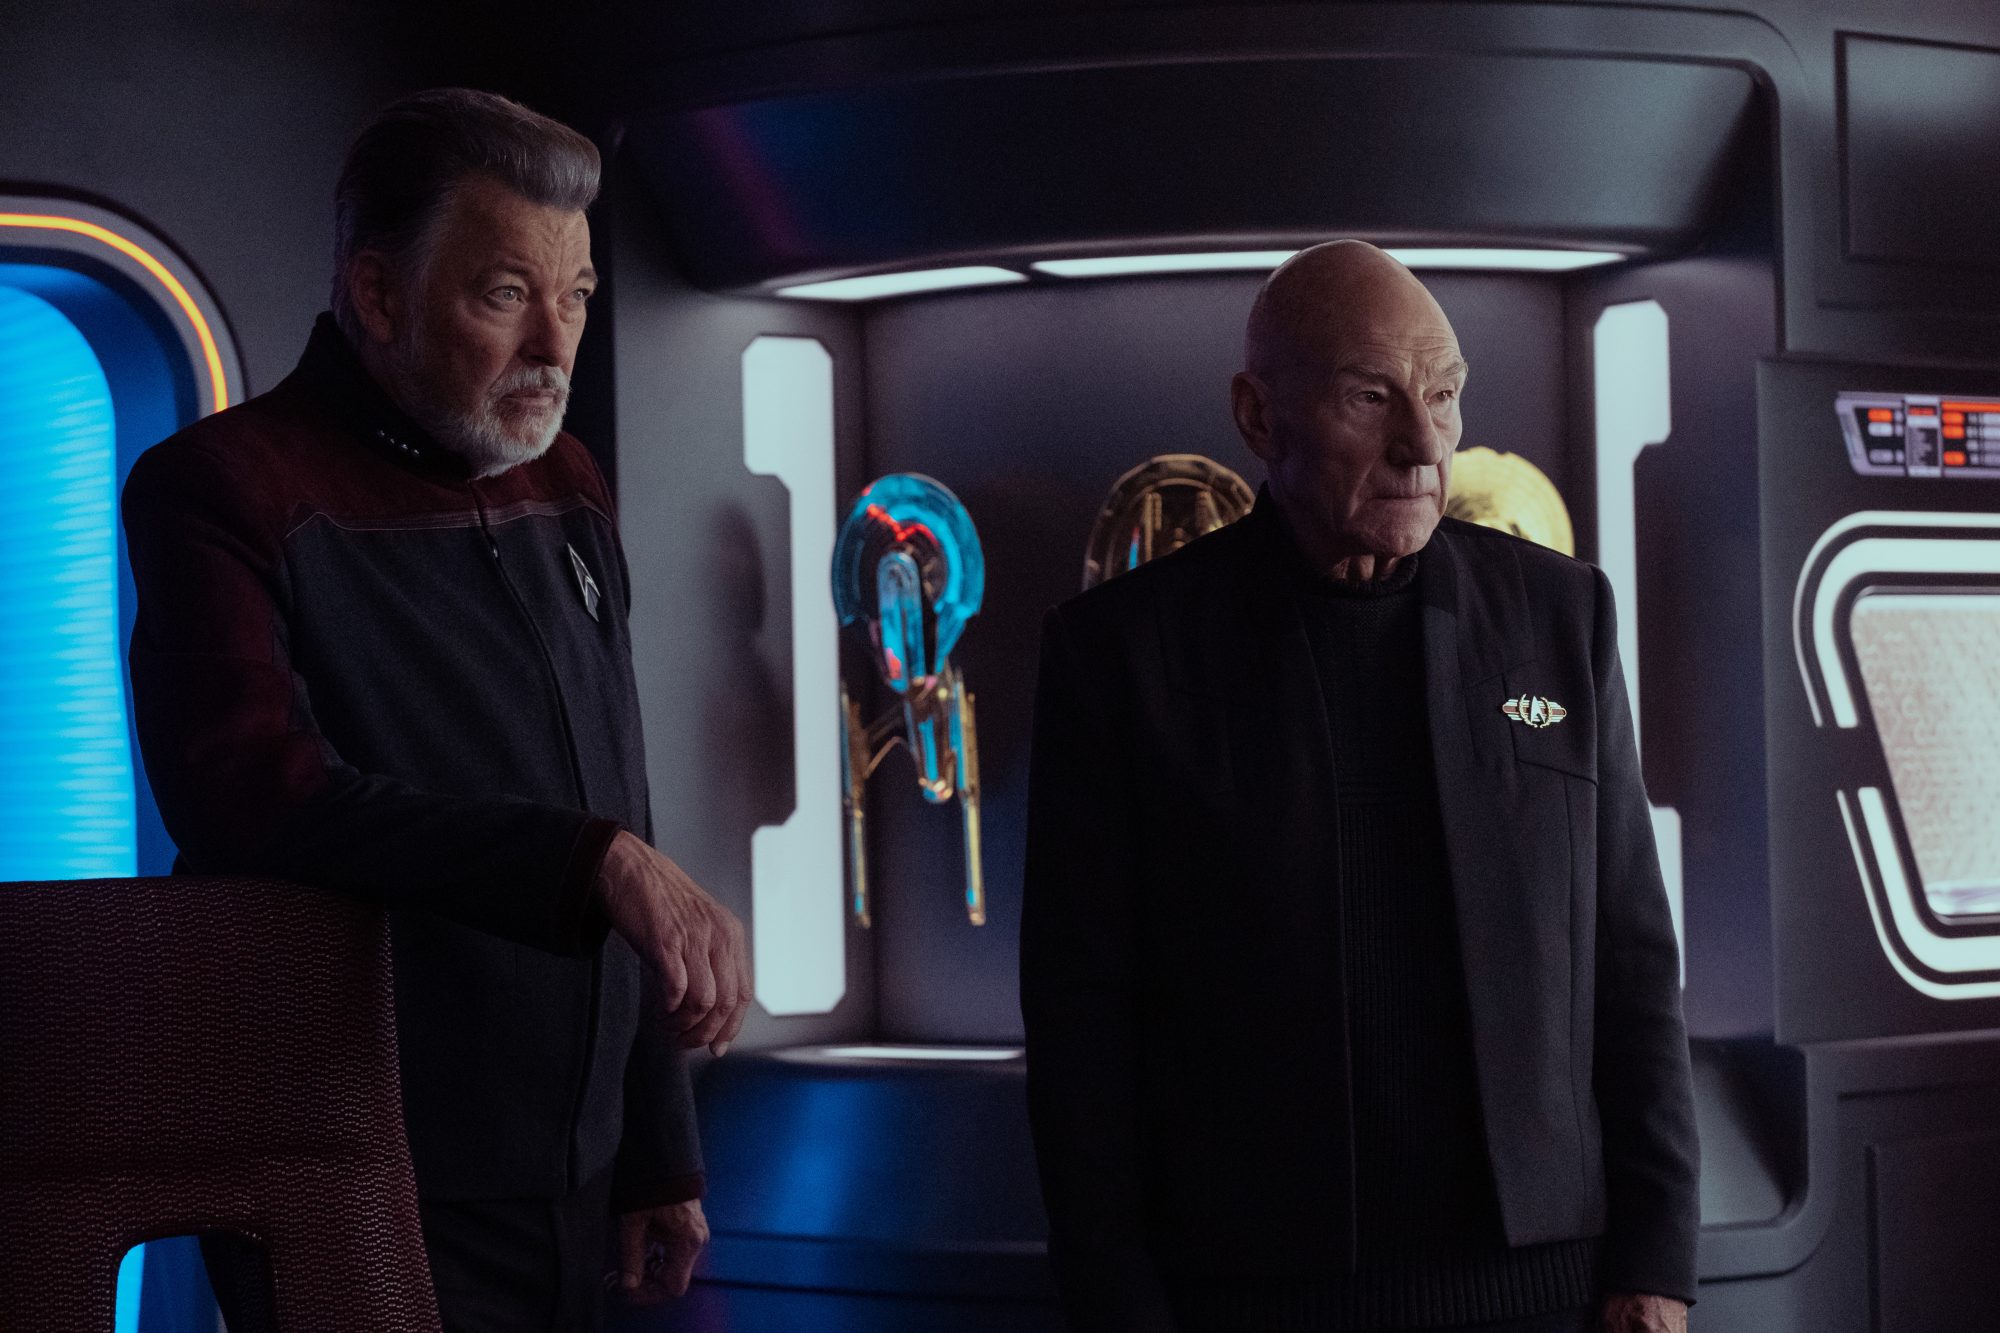 Jonathan Frakes as Riker and Patrick Stewart as Picard of the Paramount+ original series STAR TREK: PICARD. Photo Cr: Trae Paatton/Paramount+ © 2022 CBS Studios Inc. All Rights Reserved.